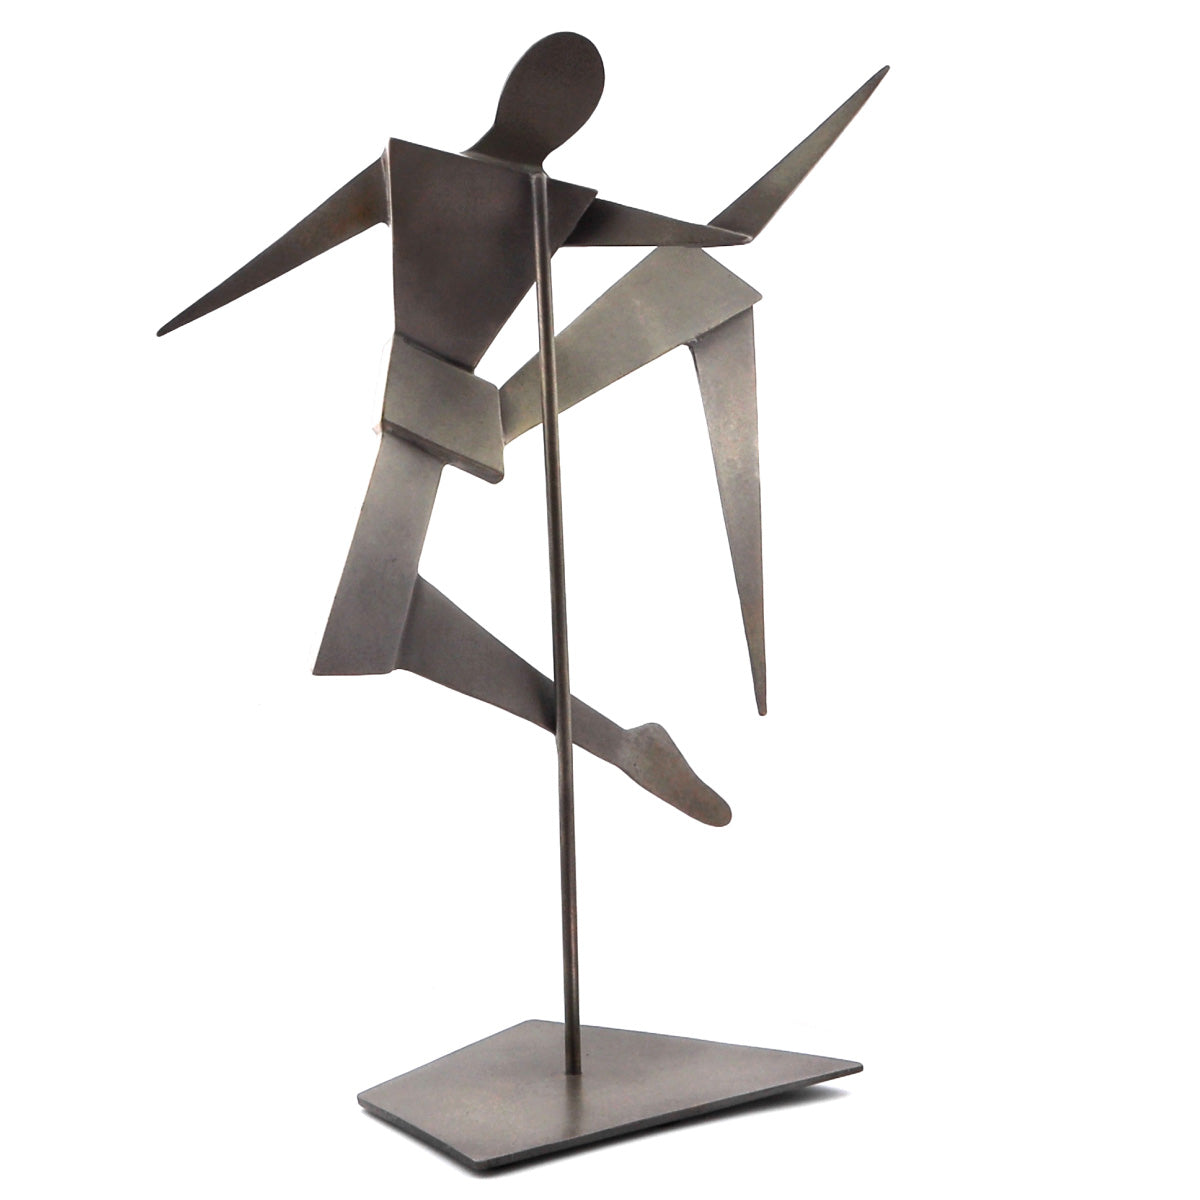 Shirley Wagner - Surge: Bronze with Silver Nitrate Patina, Edition 1/25 (SC92312A-1021-002) 2
